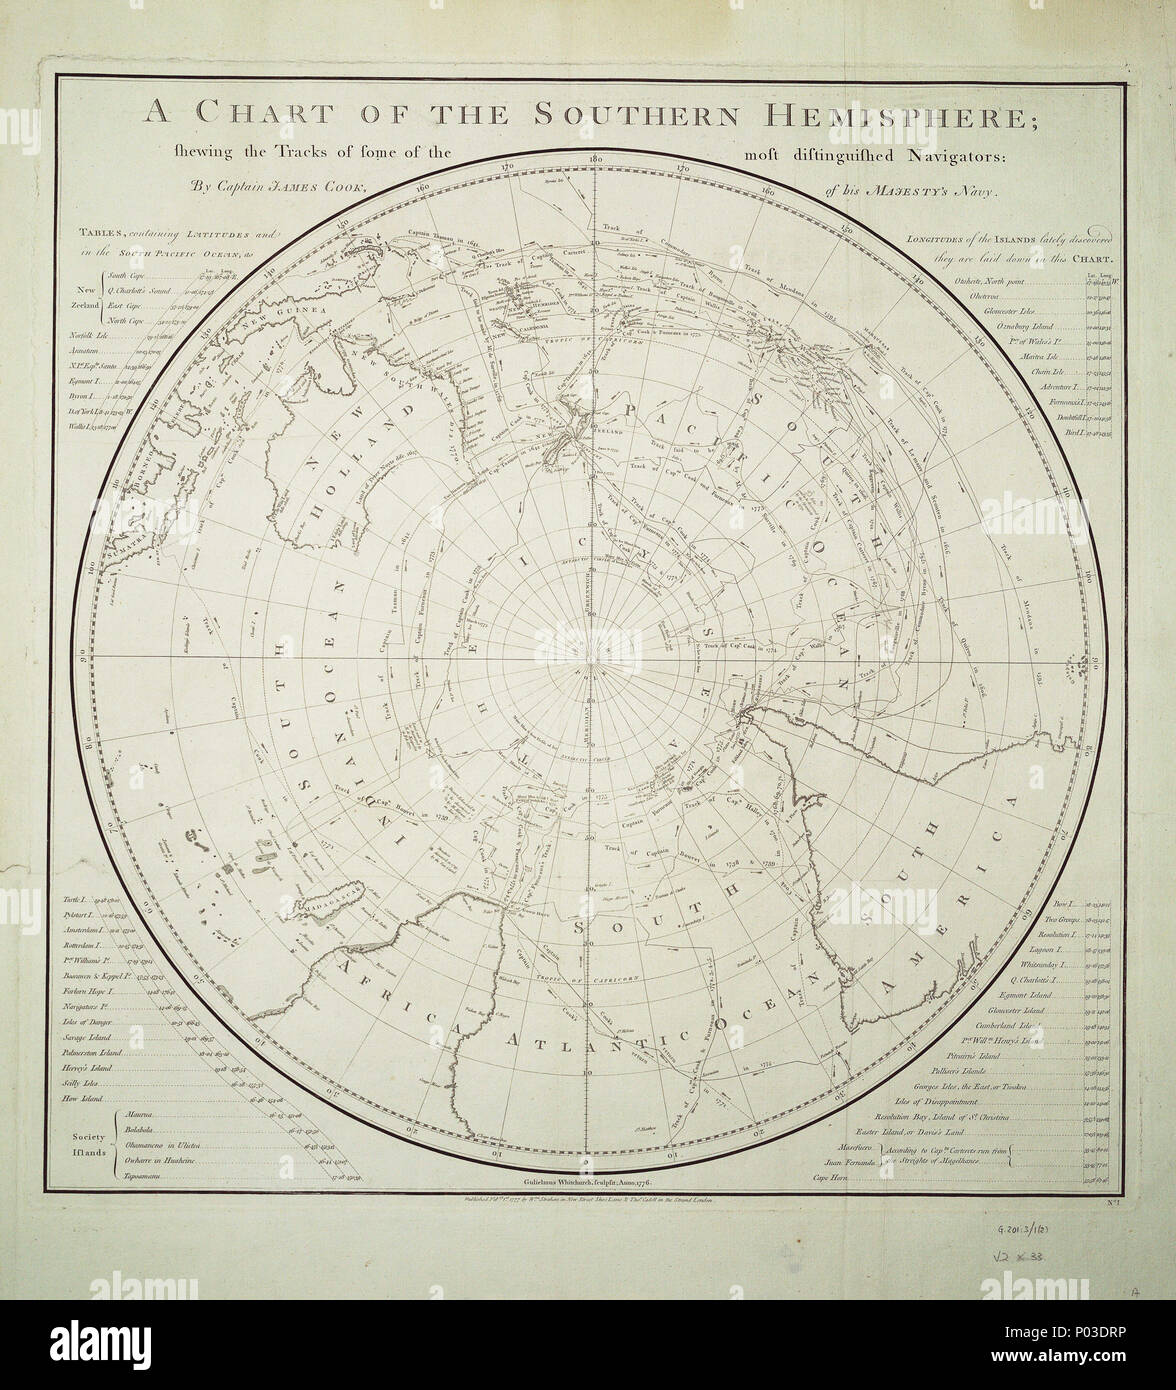 .  English: A chart of the southern hemisphere; shewing the tracks of some of the most distinguished navigators: by Captain James Cook, of His Majesty's navy.Single sheet, engraving. Polar projection. The chart shows the tracks of Mendana in 1595, Quiros in 1606, Le Maire & Schouten in 1616, Tasman in 1642, Halley in 1700, Roggewein in 1722, Bouvet in 1738-39, Byron in 1765, Wallis in 1767, Bougainville in 1768, Surville in 1769, and Cook's first and second voyages. Tables in the corners contain the latitudes and longitudes of the islands lately discovered in the South Pacific Ocean, as they a Stock Photo